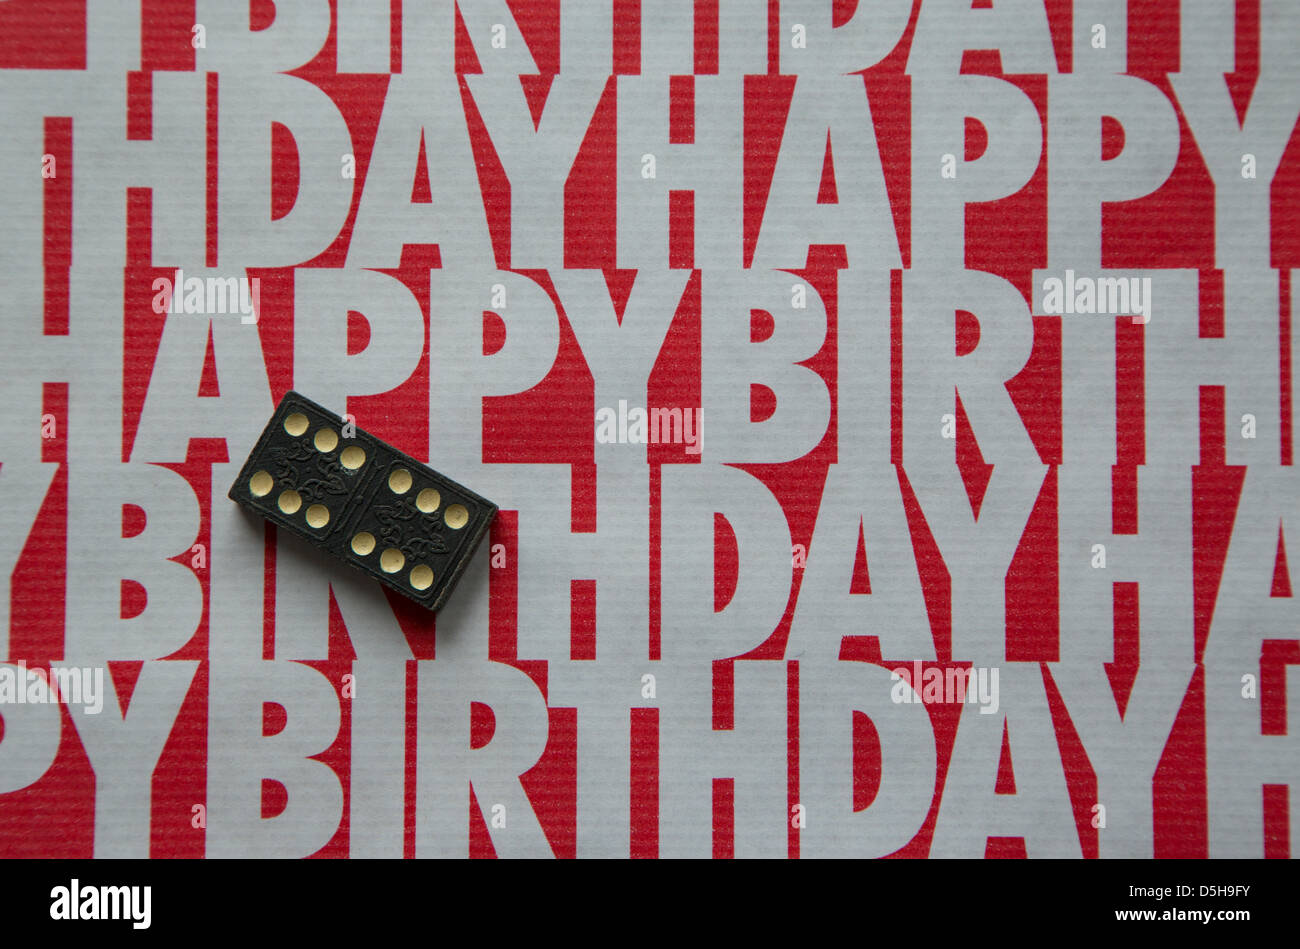 A shot of some 'happy birthday' wrapping paper in contrasting red and white colors, including a domino for contrast. Stock Photo